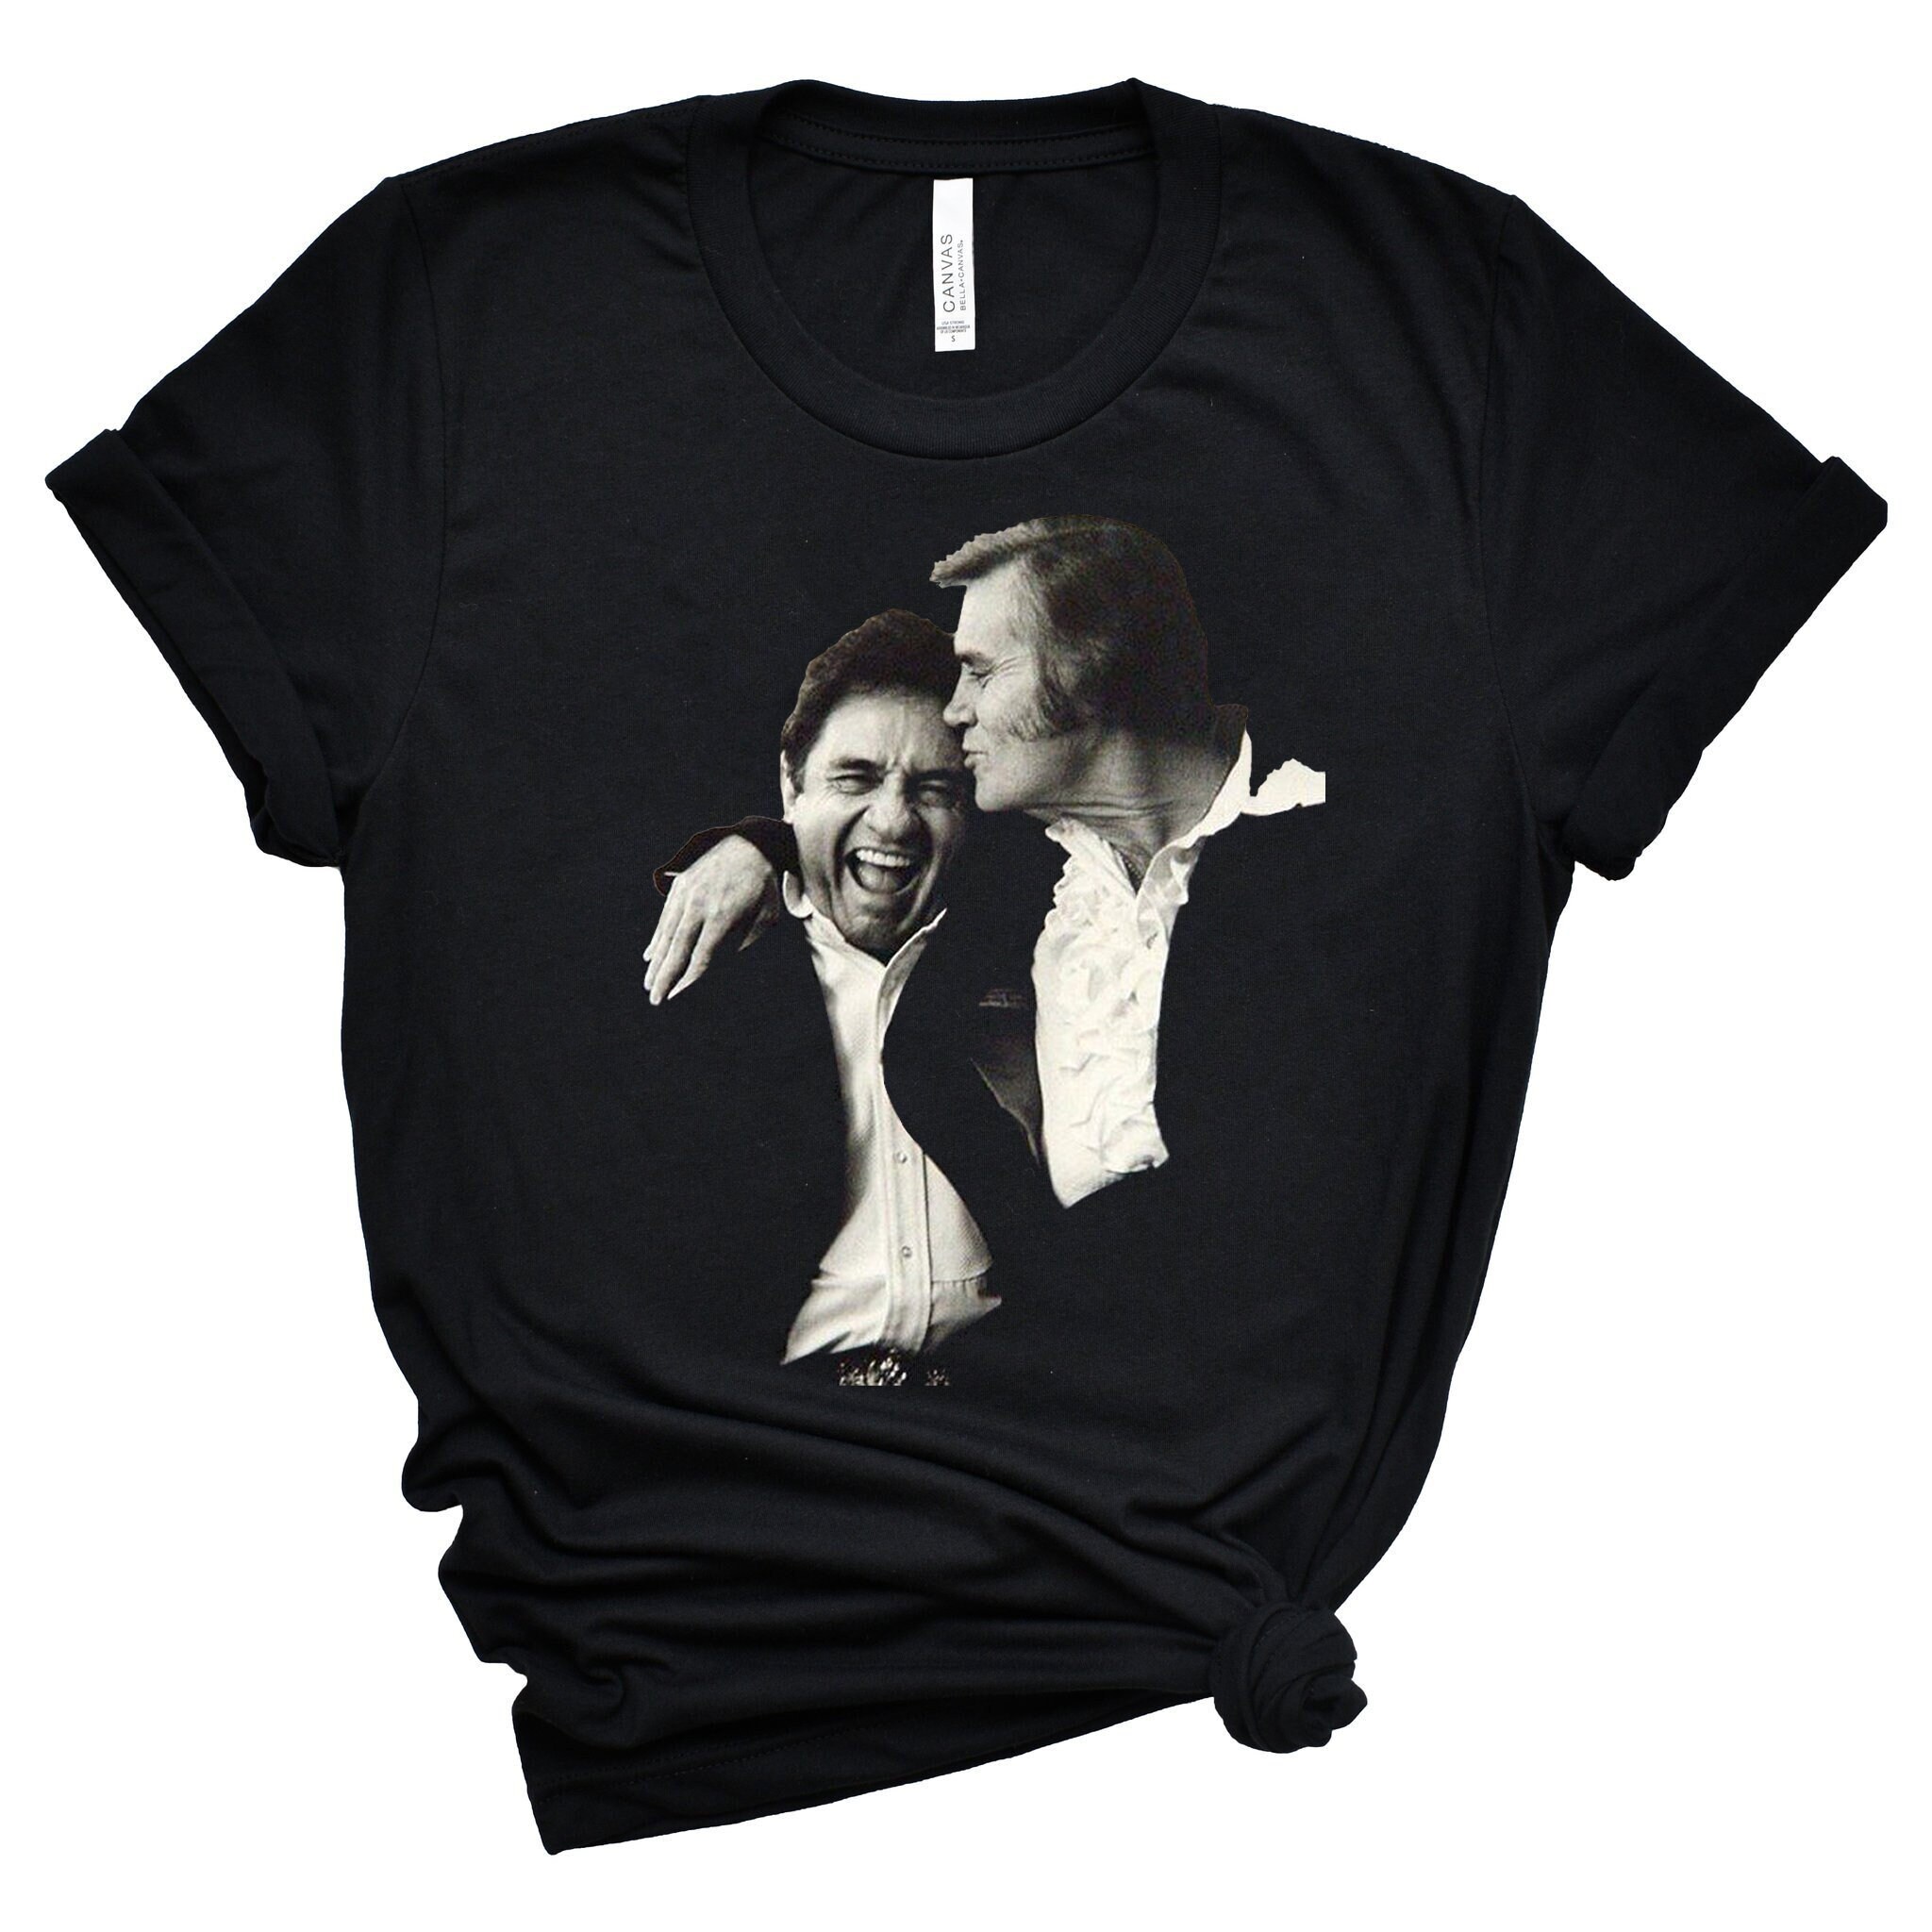 Johnny Cash and George Jones T Shirt, Country Music Tee